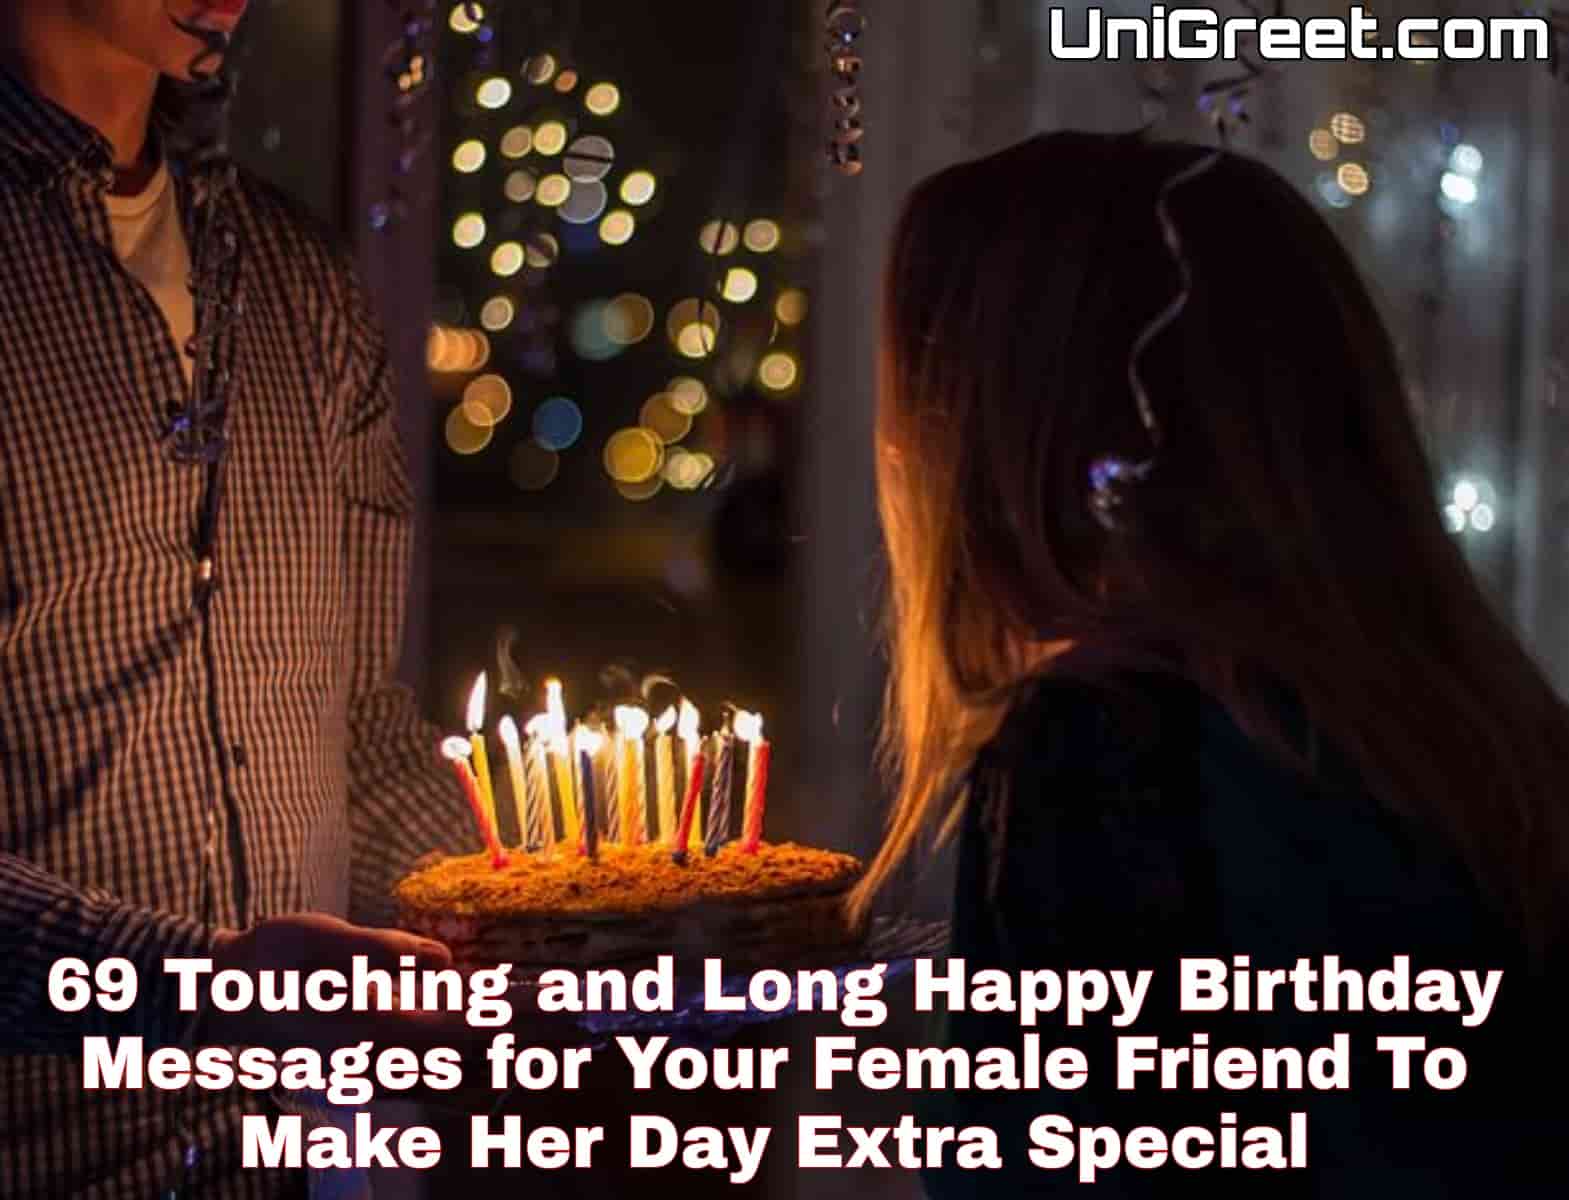 69 Touching and Long Happy Birthday Messages for Your Female Friend in 2023